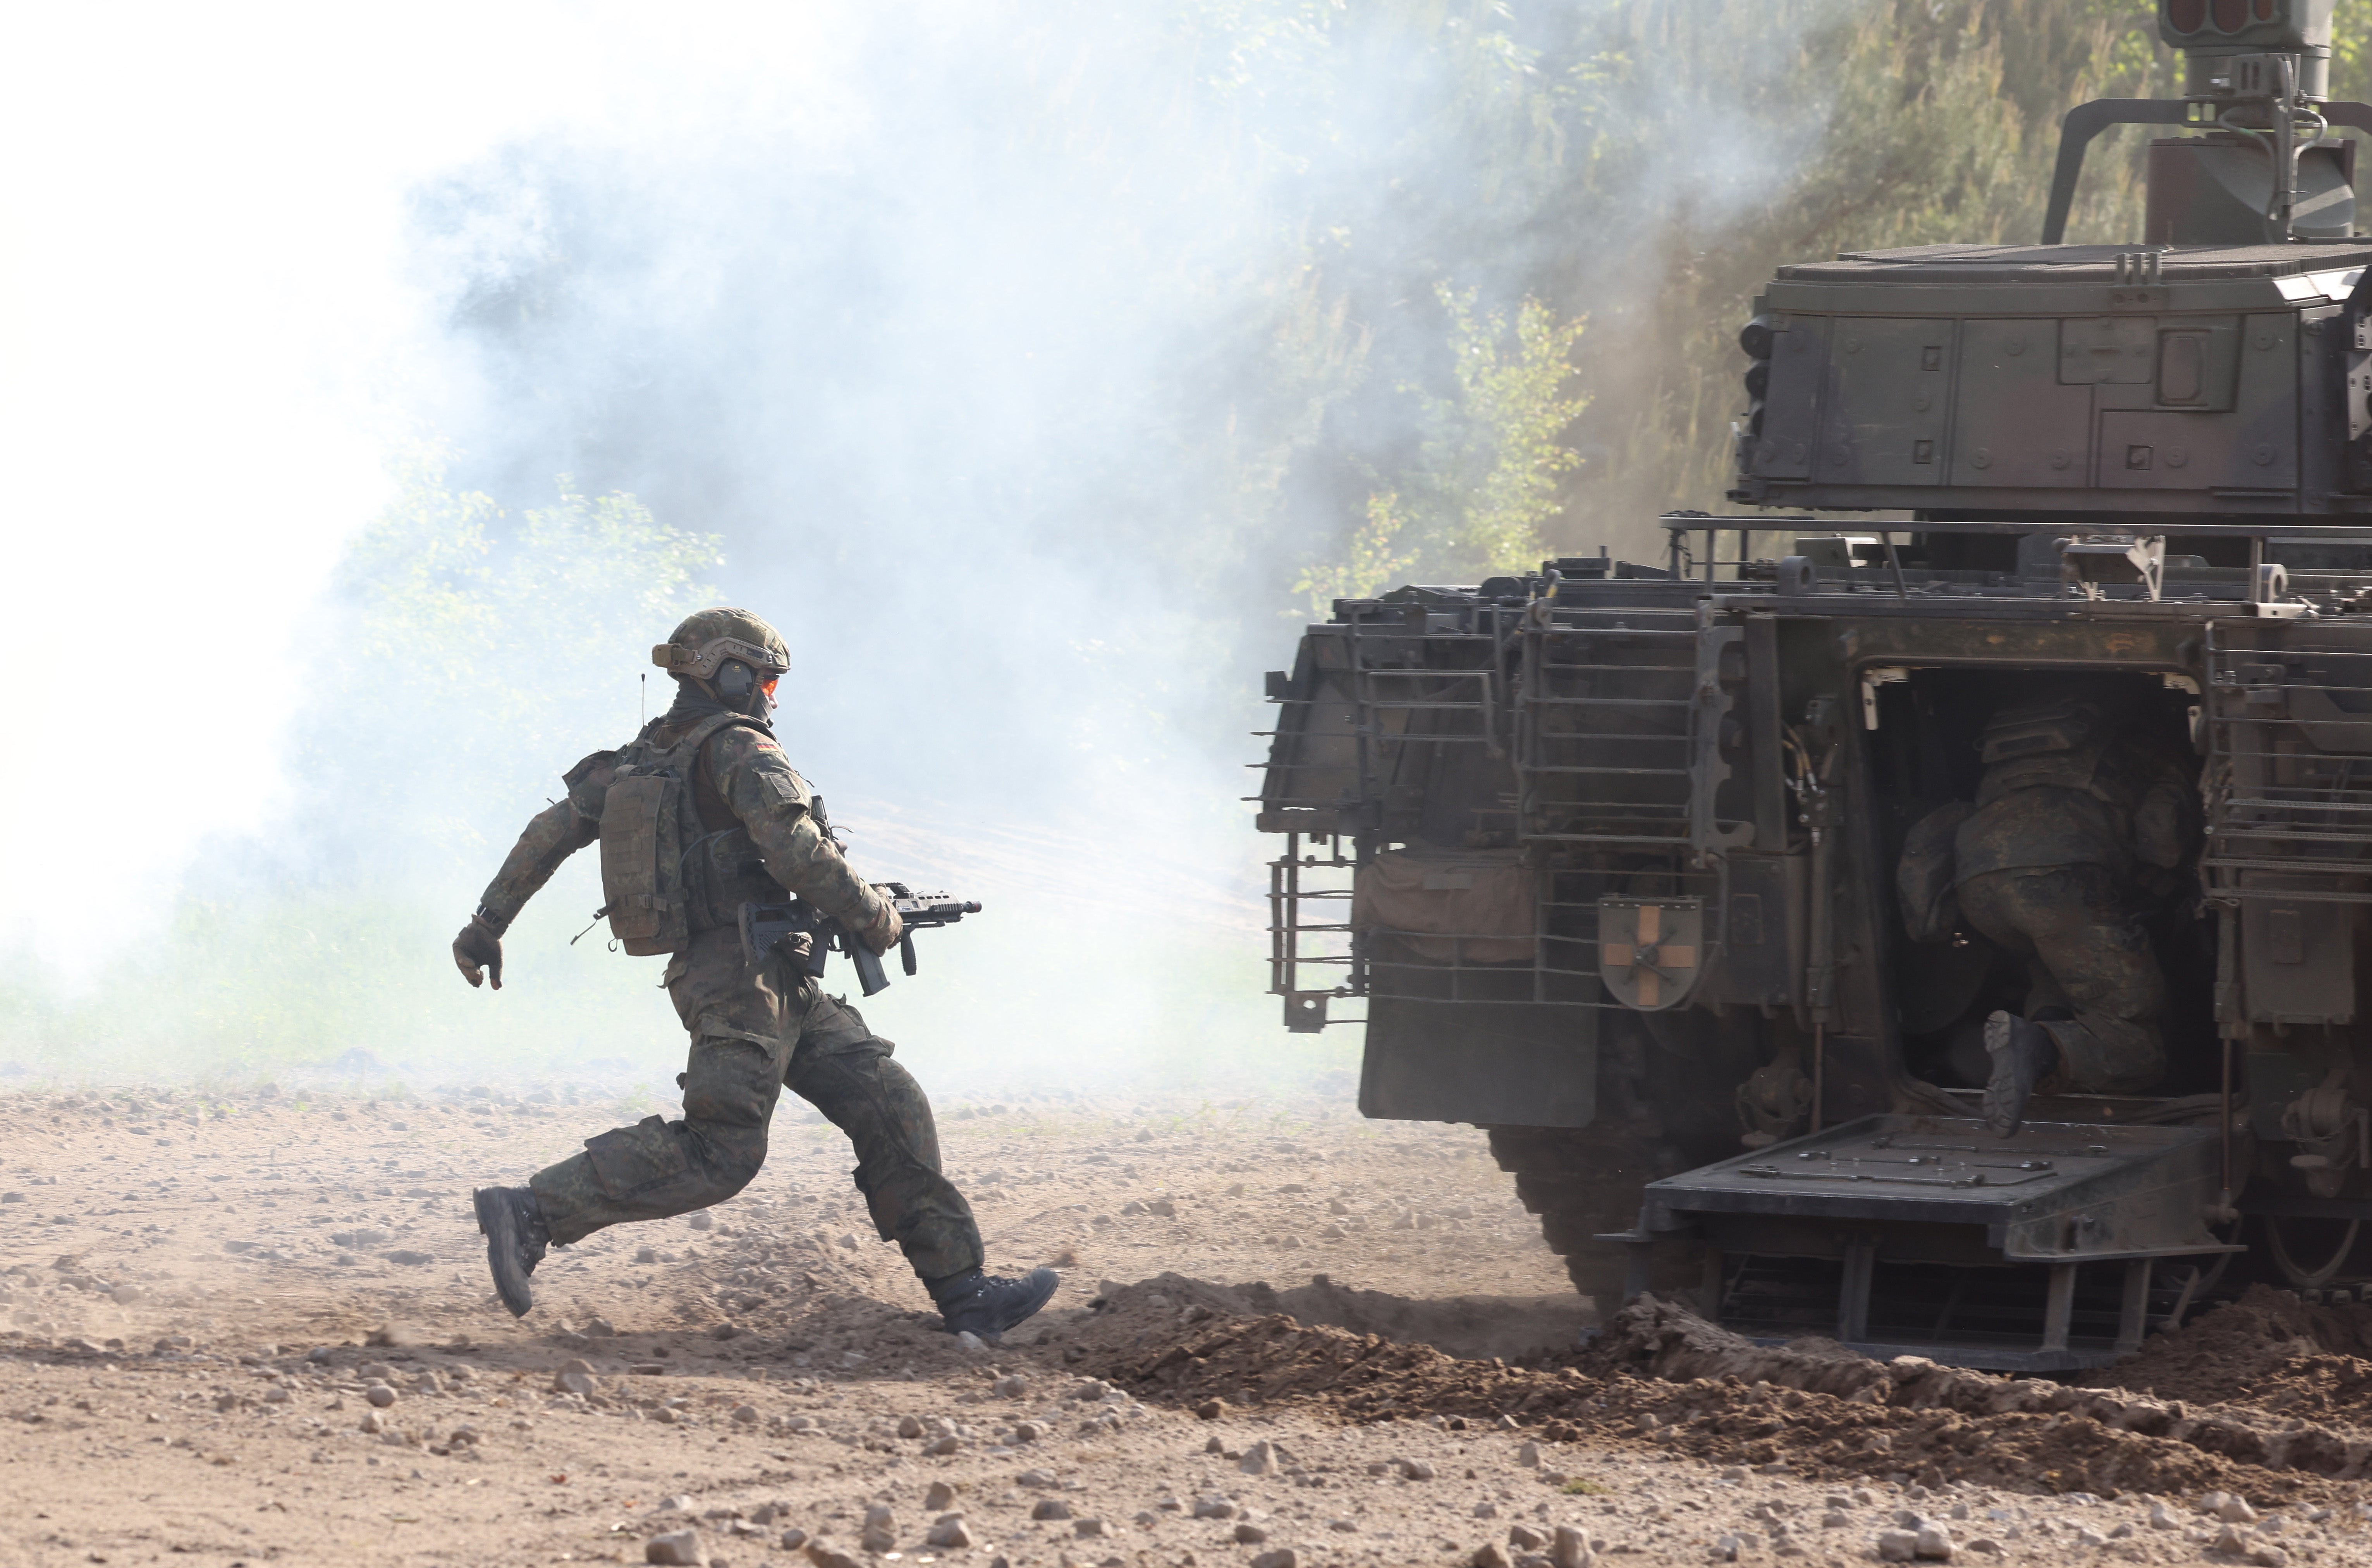 A Bundeswehr soldier runs towards a Puma mechanized infantry combat vehicle during a demonstration of capabilities by the Panzerlehrbrigade 9 tank training brigade on June 02, 2021 in Munster, Germany. Germany has steadily increased its defense spending in recent years, to a record EUR 53 billion slated for 2021